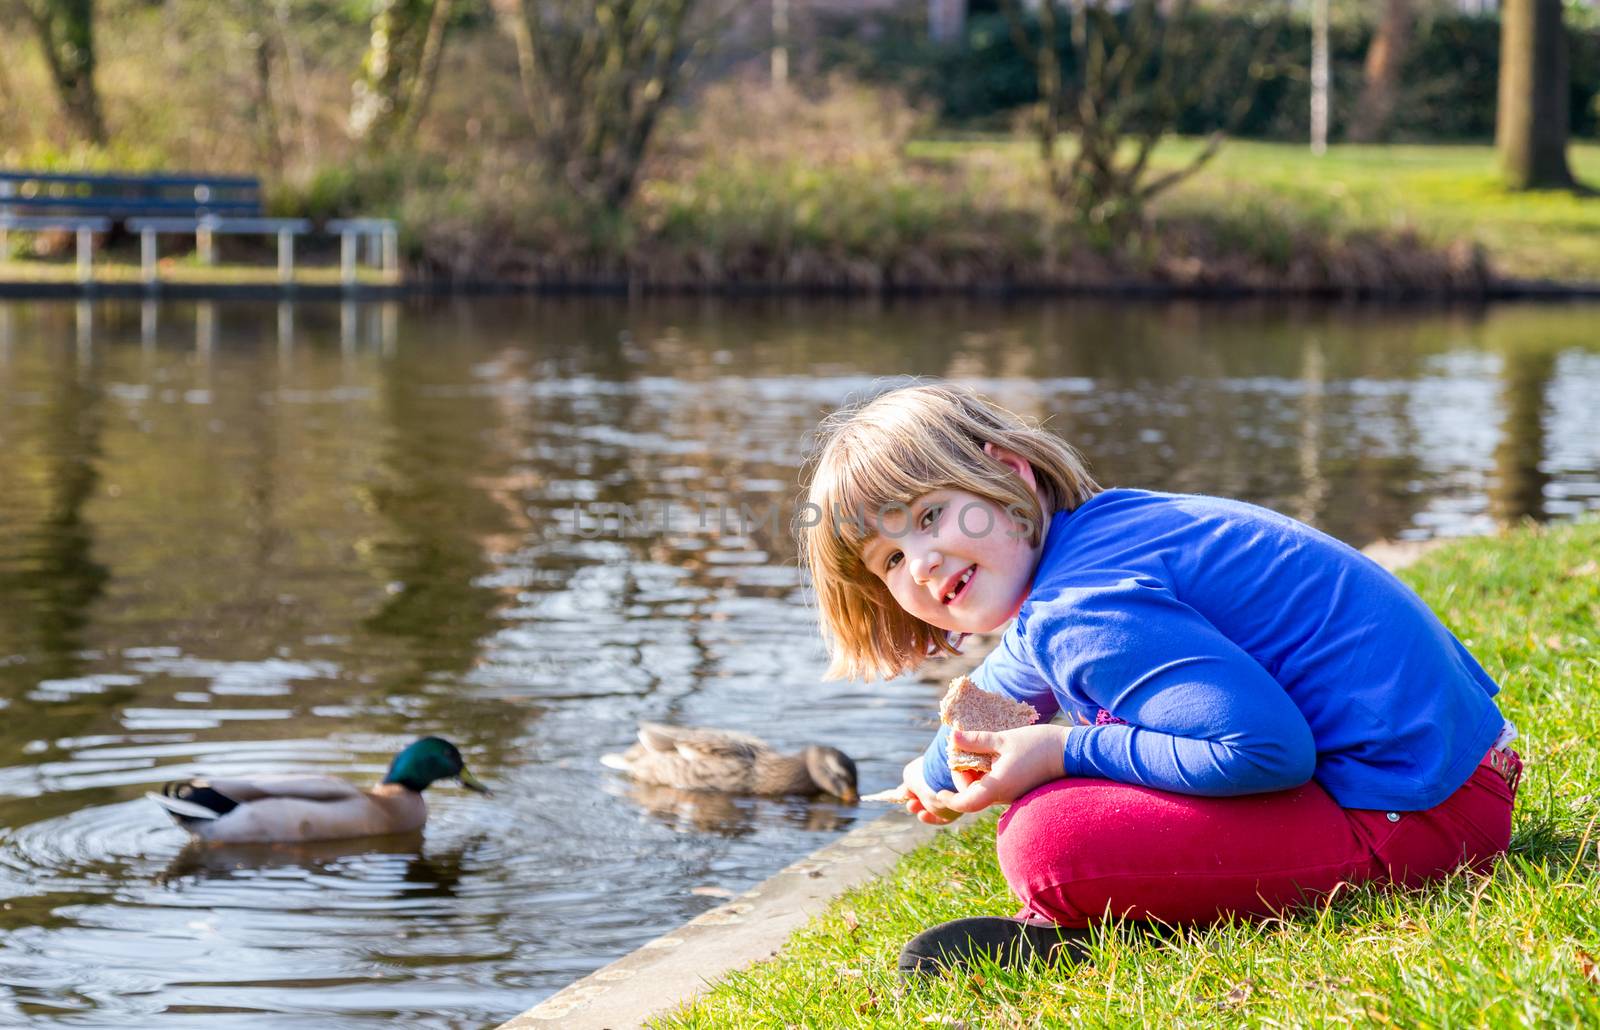 Young girl feeding ducks with bread by BenSchonewille